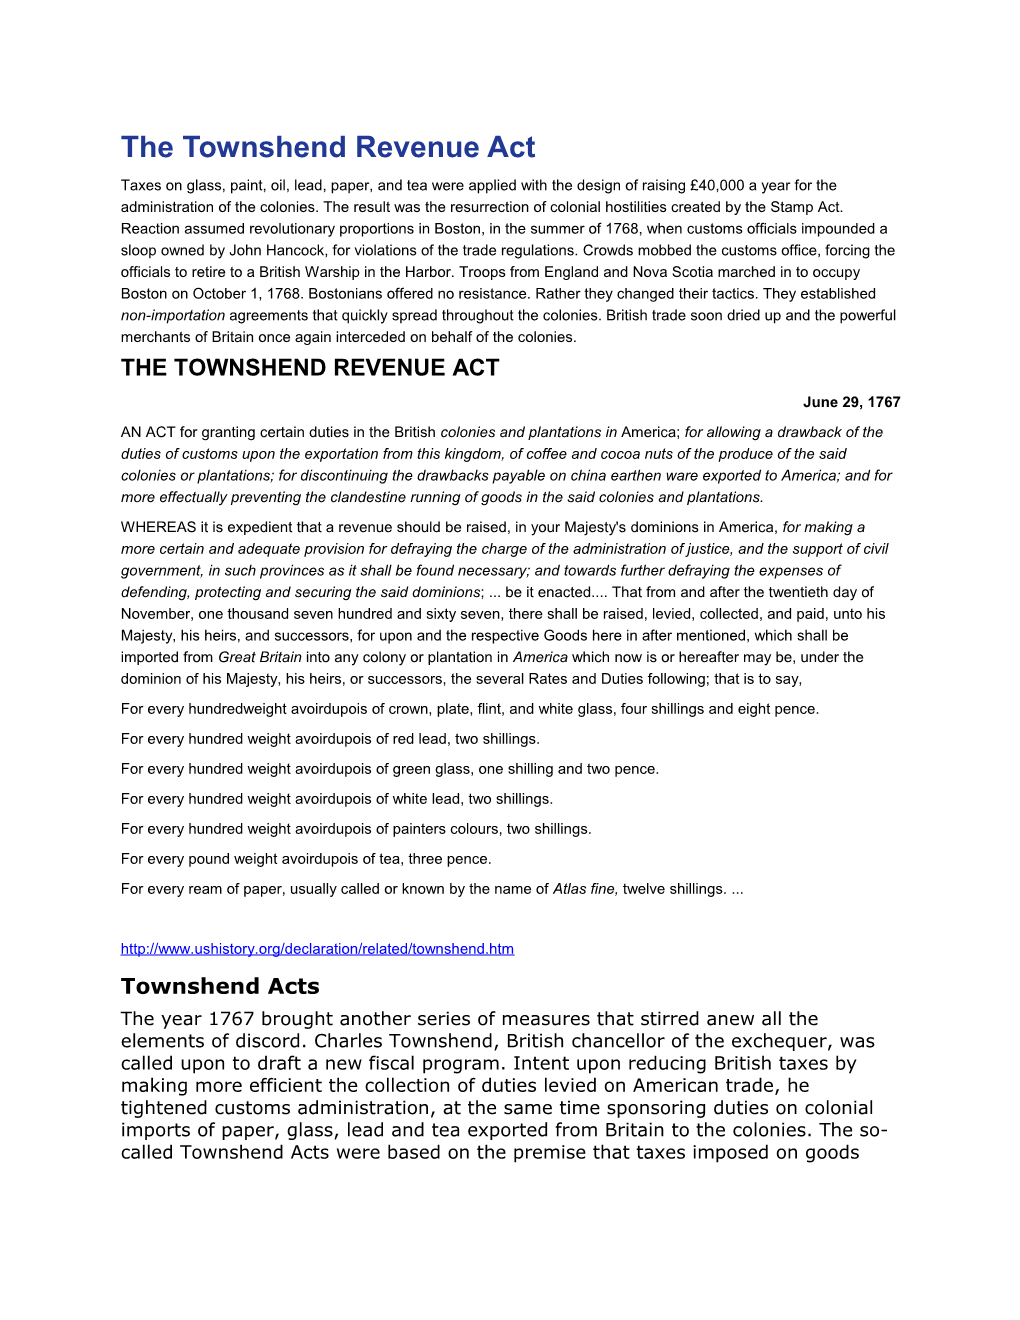 The Townshend Revenue Act